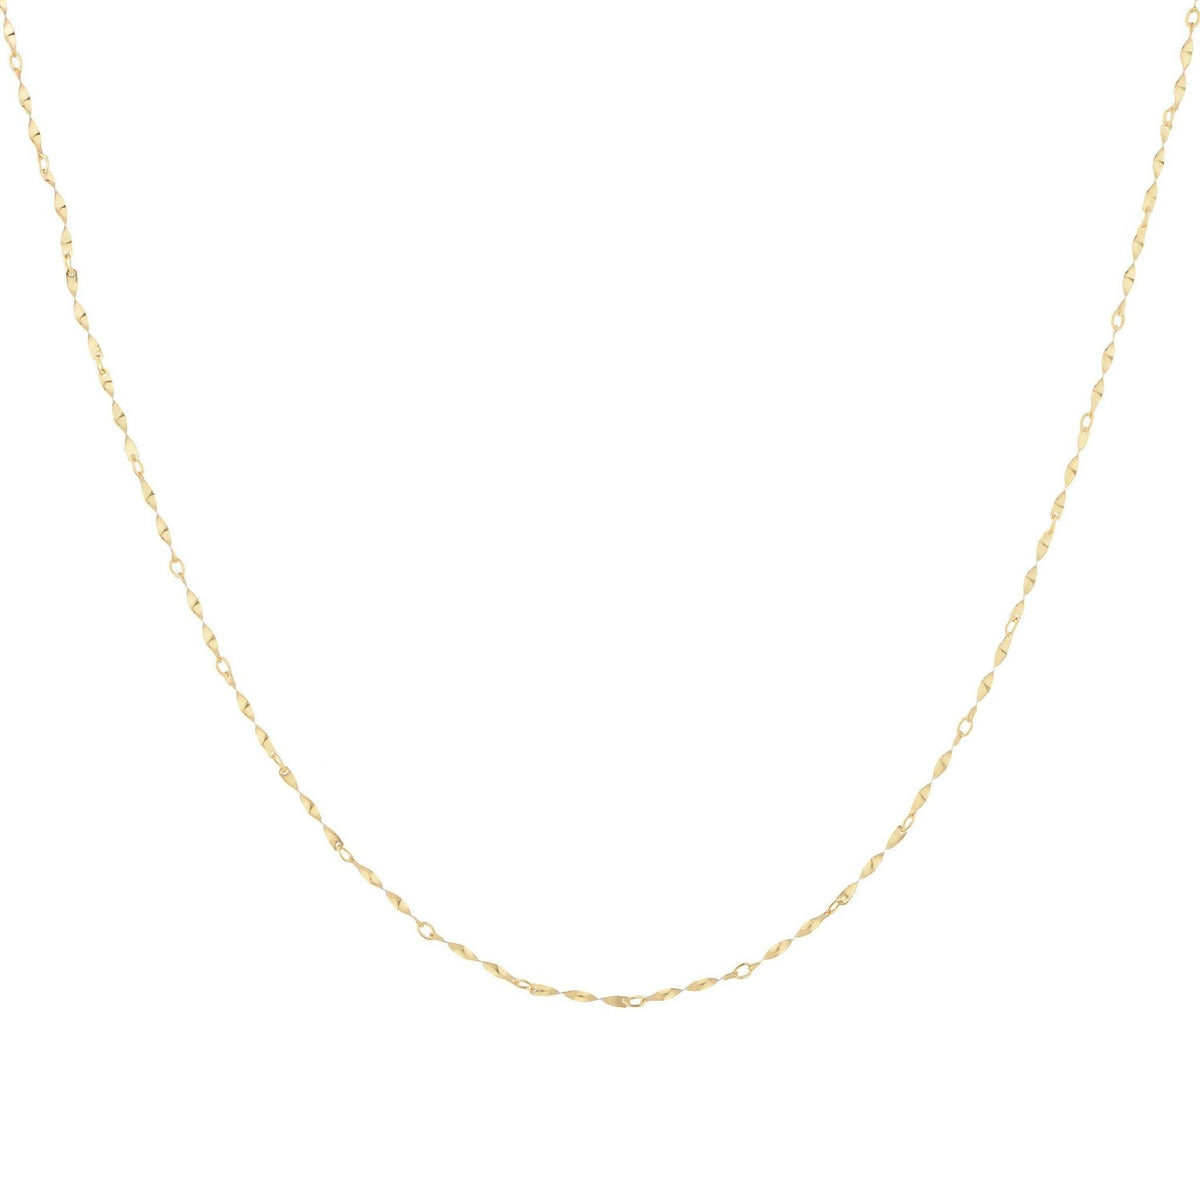 Chrystie Chain Necklace - Taylor Adorn